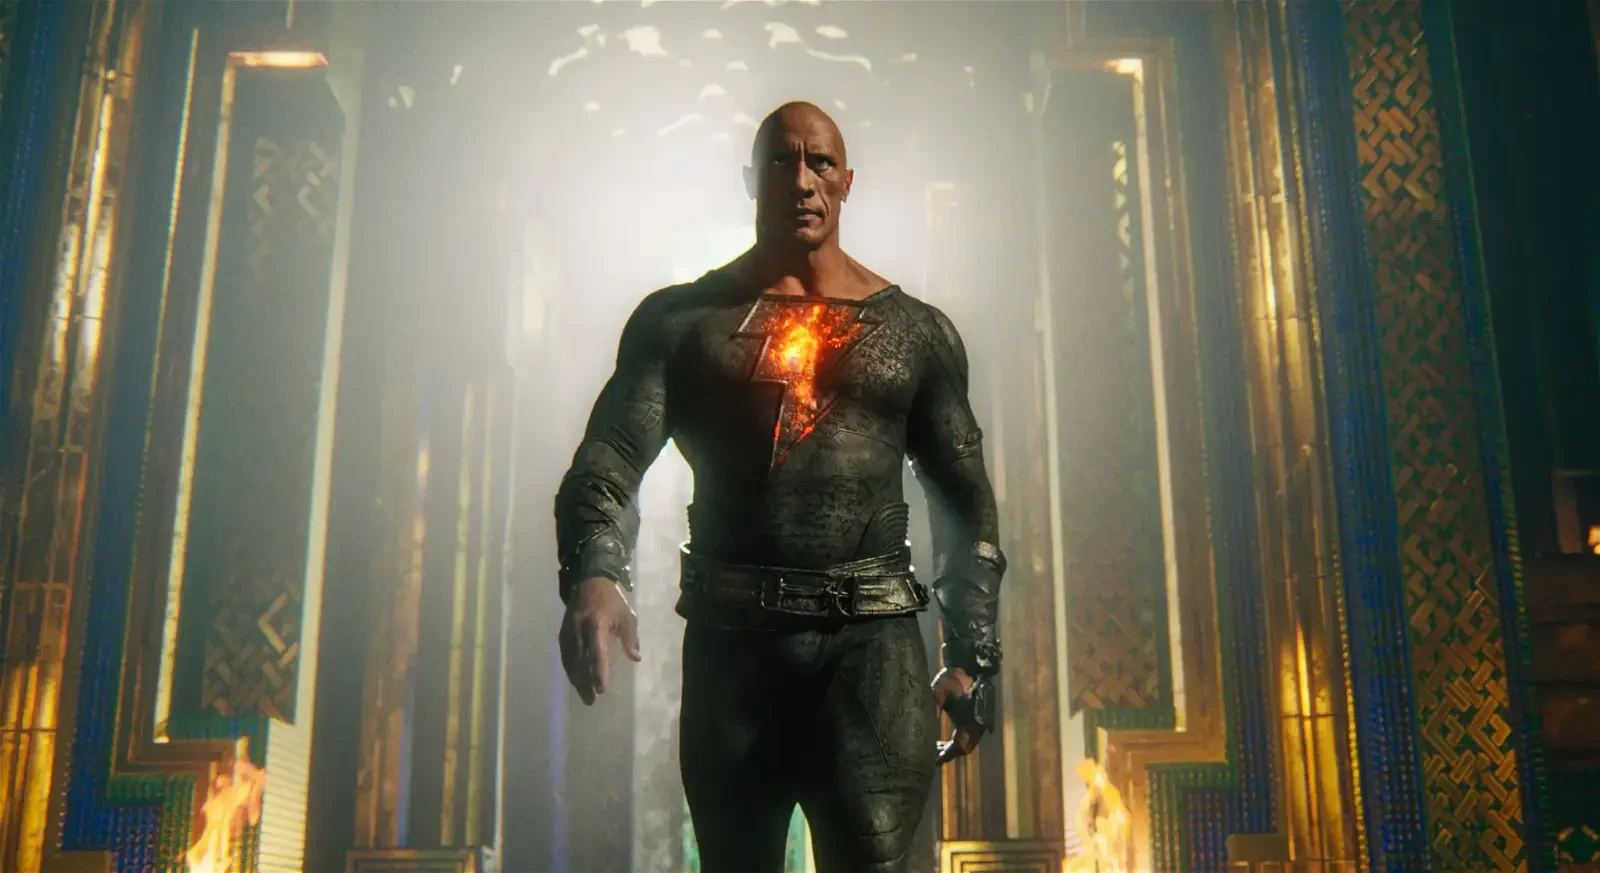 Dwayne The Rock Johnson in and as Black Adam.